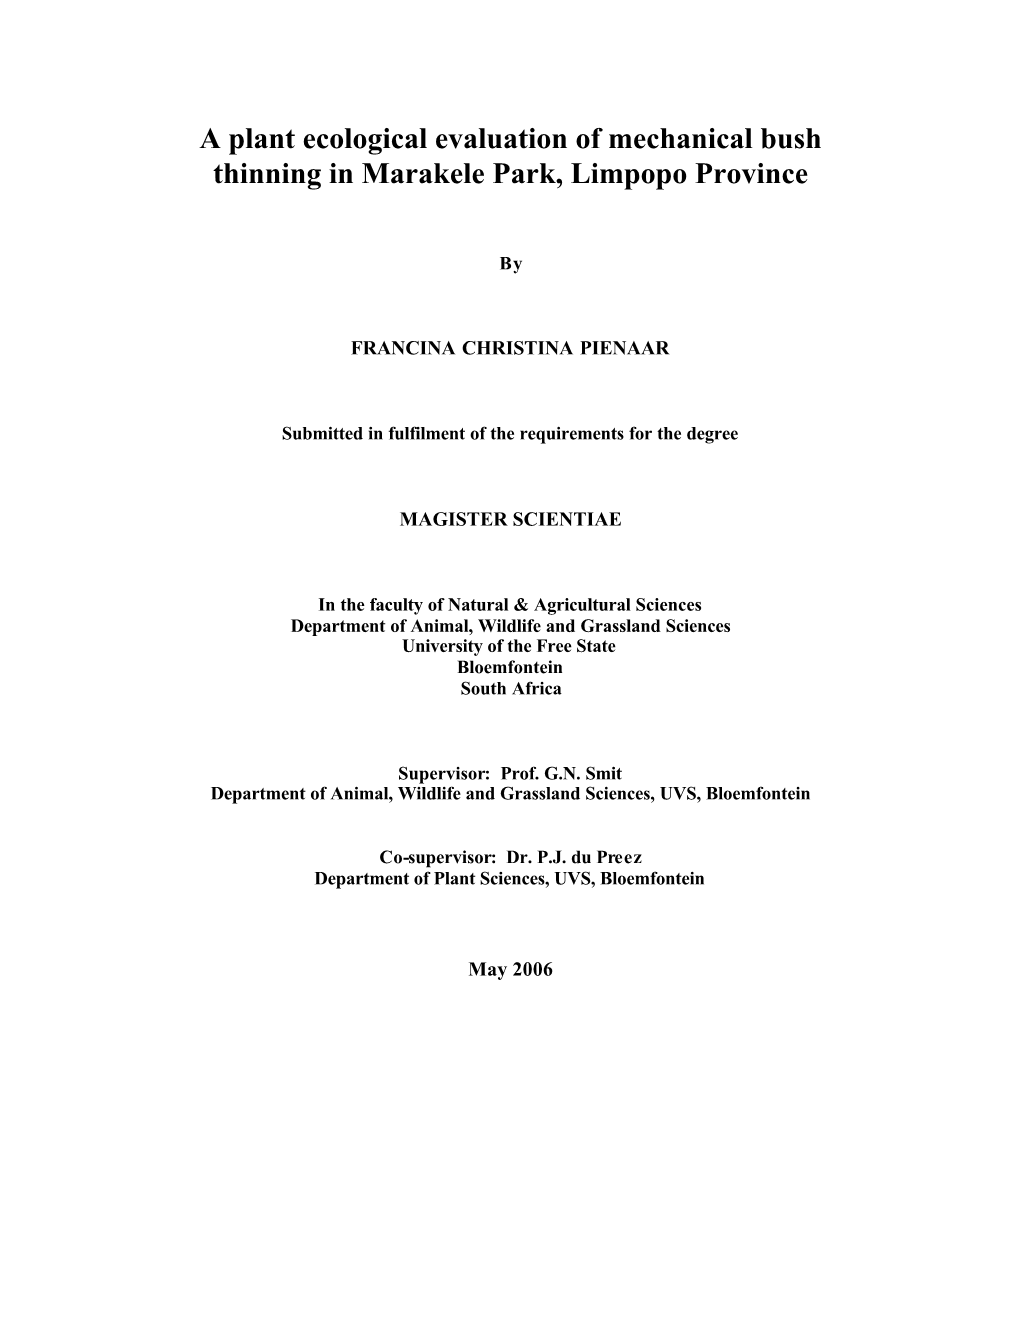 M.Sc Thesis, University of the Free State, Bloemfontein